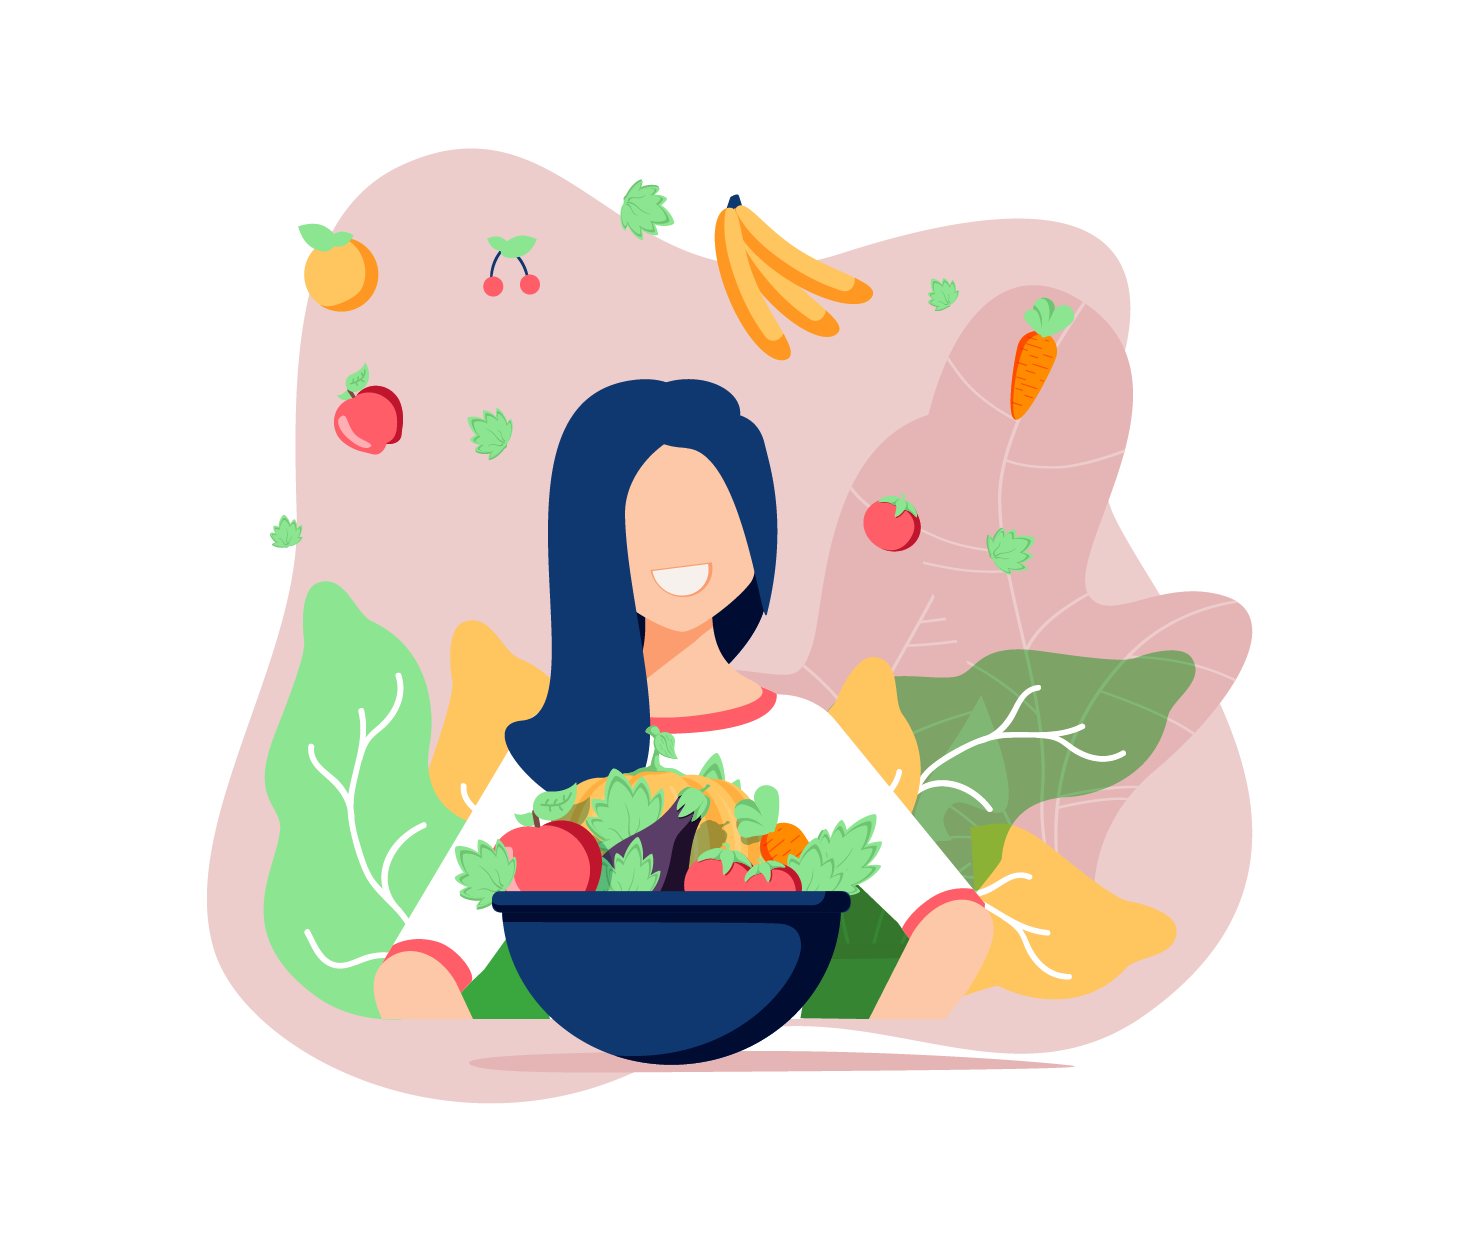 Digital art of person with bowl of salad/veg